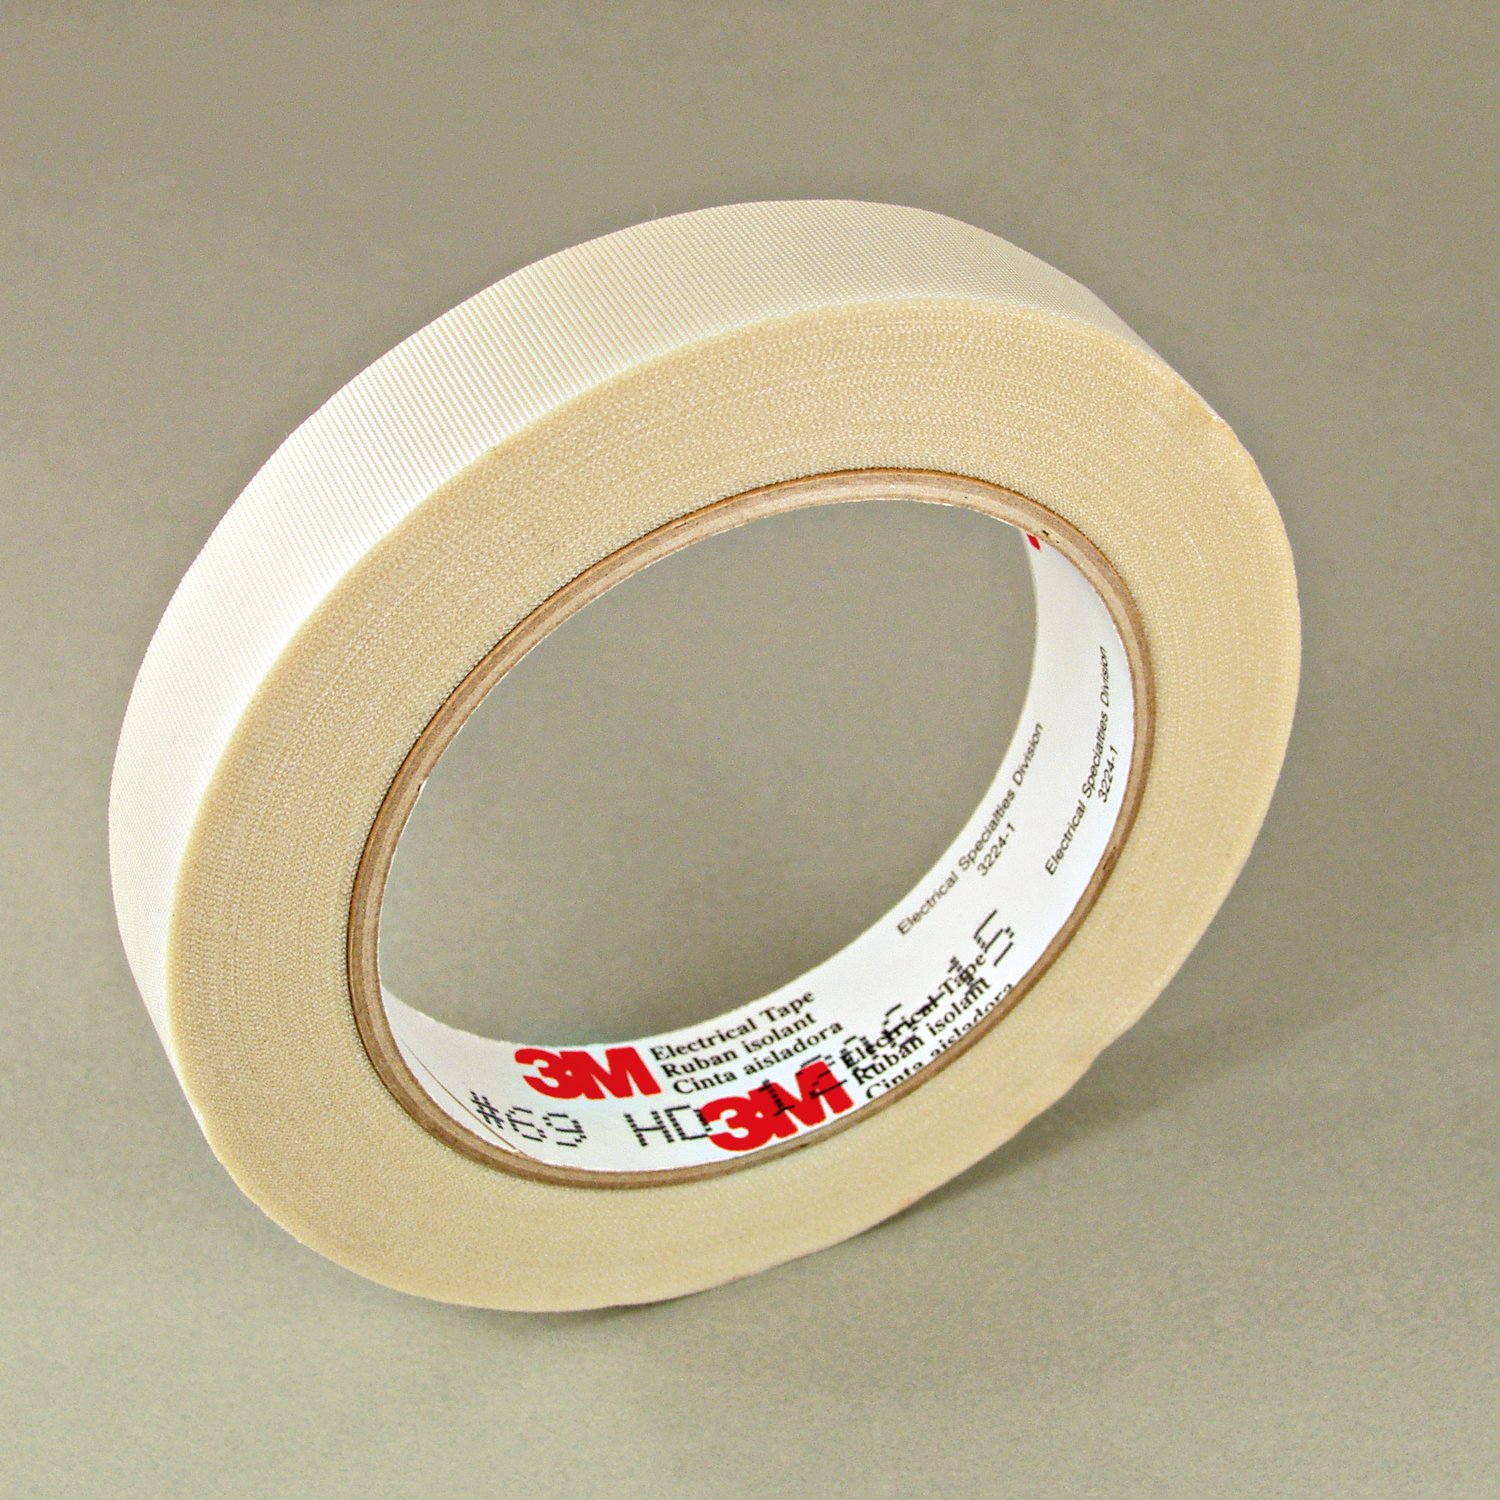 7/8" 3M 69 Glass Cloth Electrical Tape (3M69) with Silicone Adhesive 180°C, white, 7/8" wide x  36 YD roll